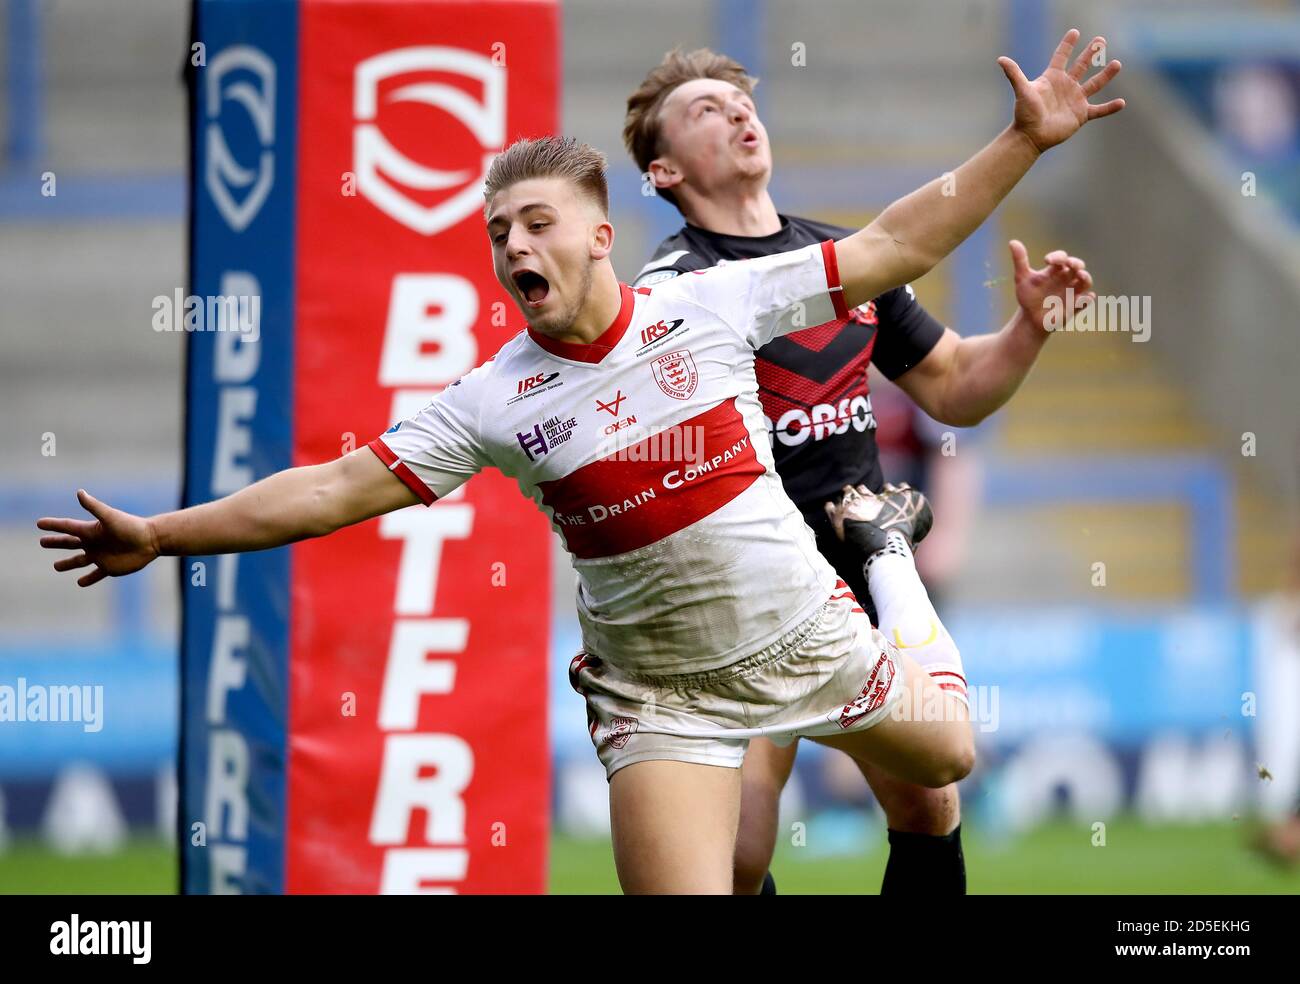 Salford Red Devils' Olly Ashall-Bott (right) pushes Hull KR's Mikey Lewis resulting in Hull KR being awarded a penalty try during the Betfred Super League match at the Halliwell Jones Stadium, Warrington. Stock Photo